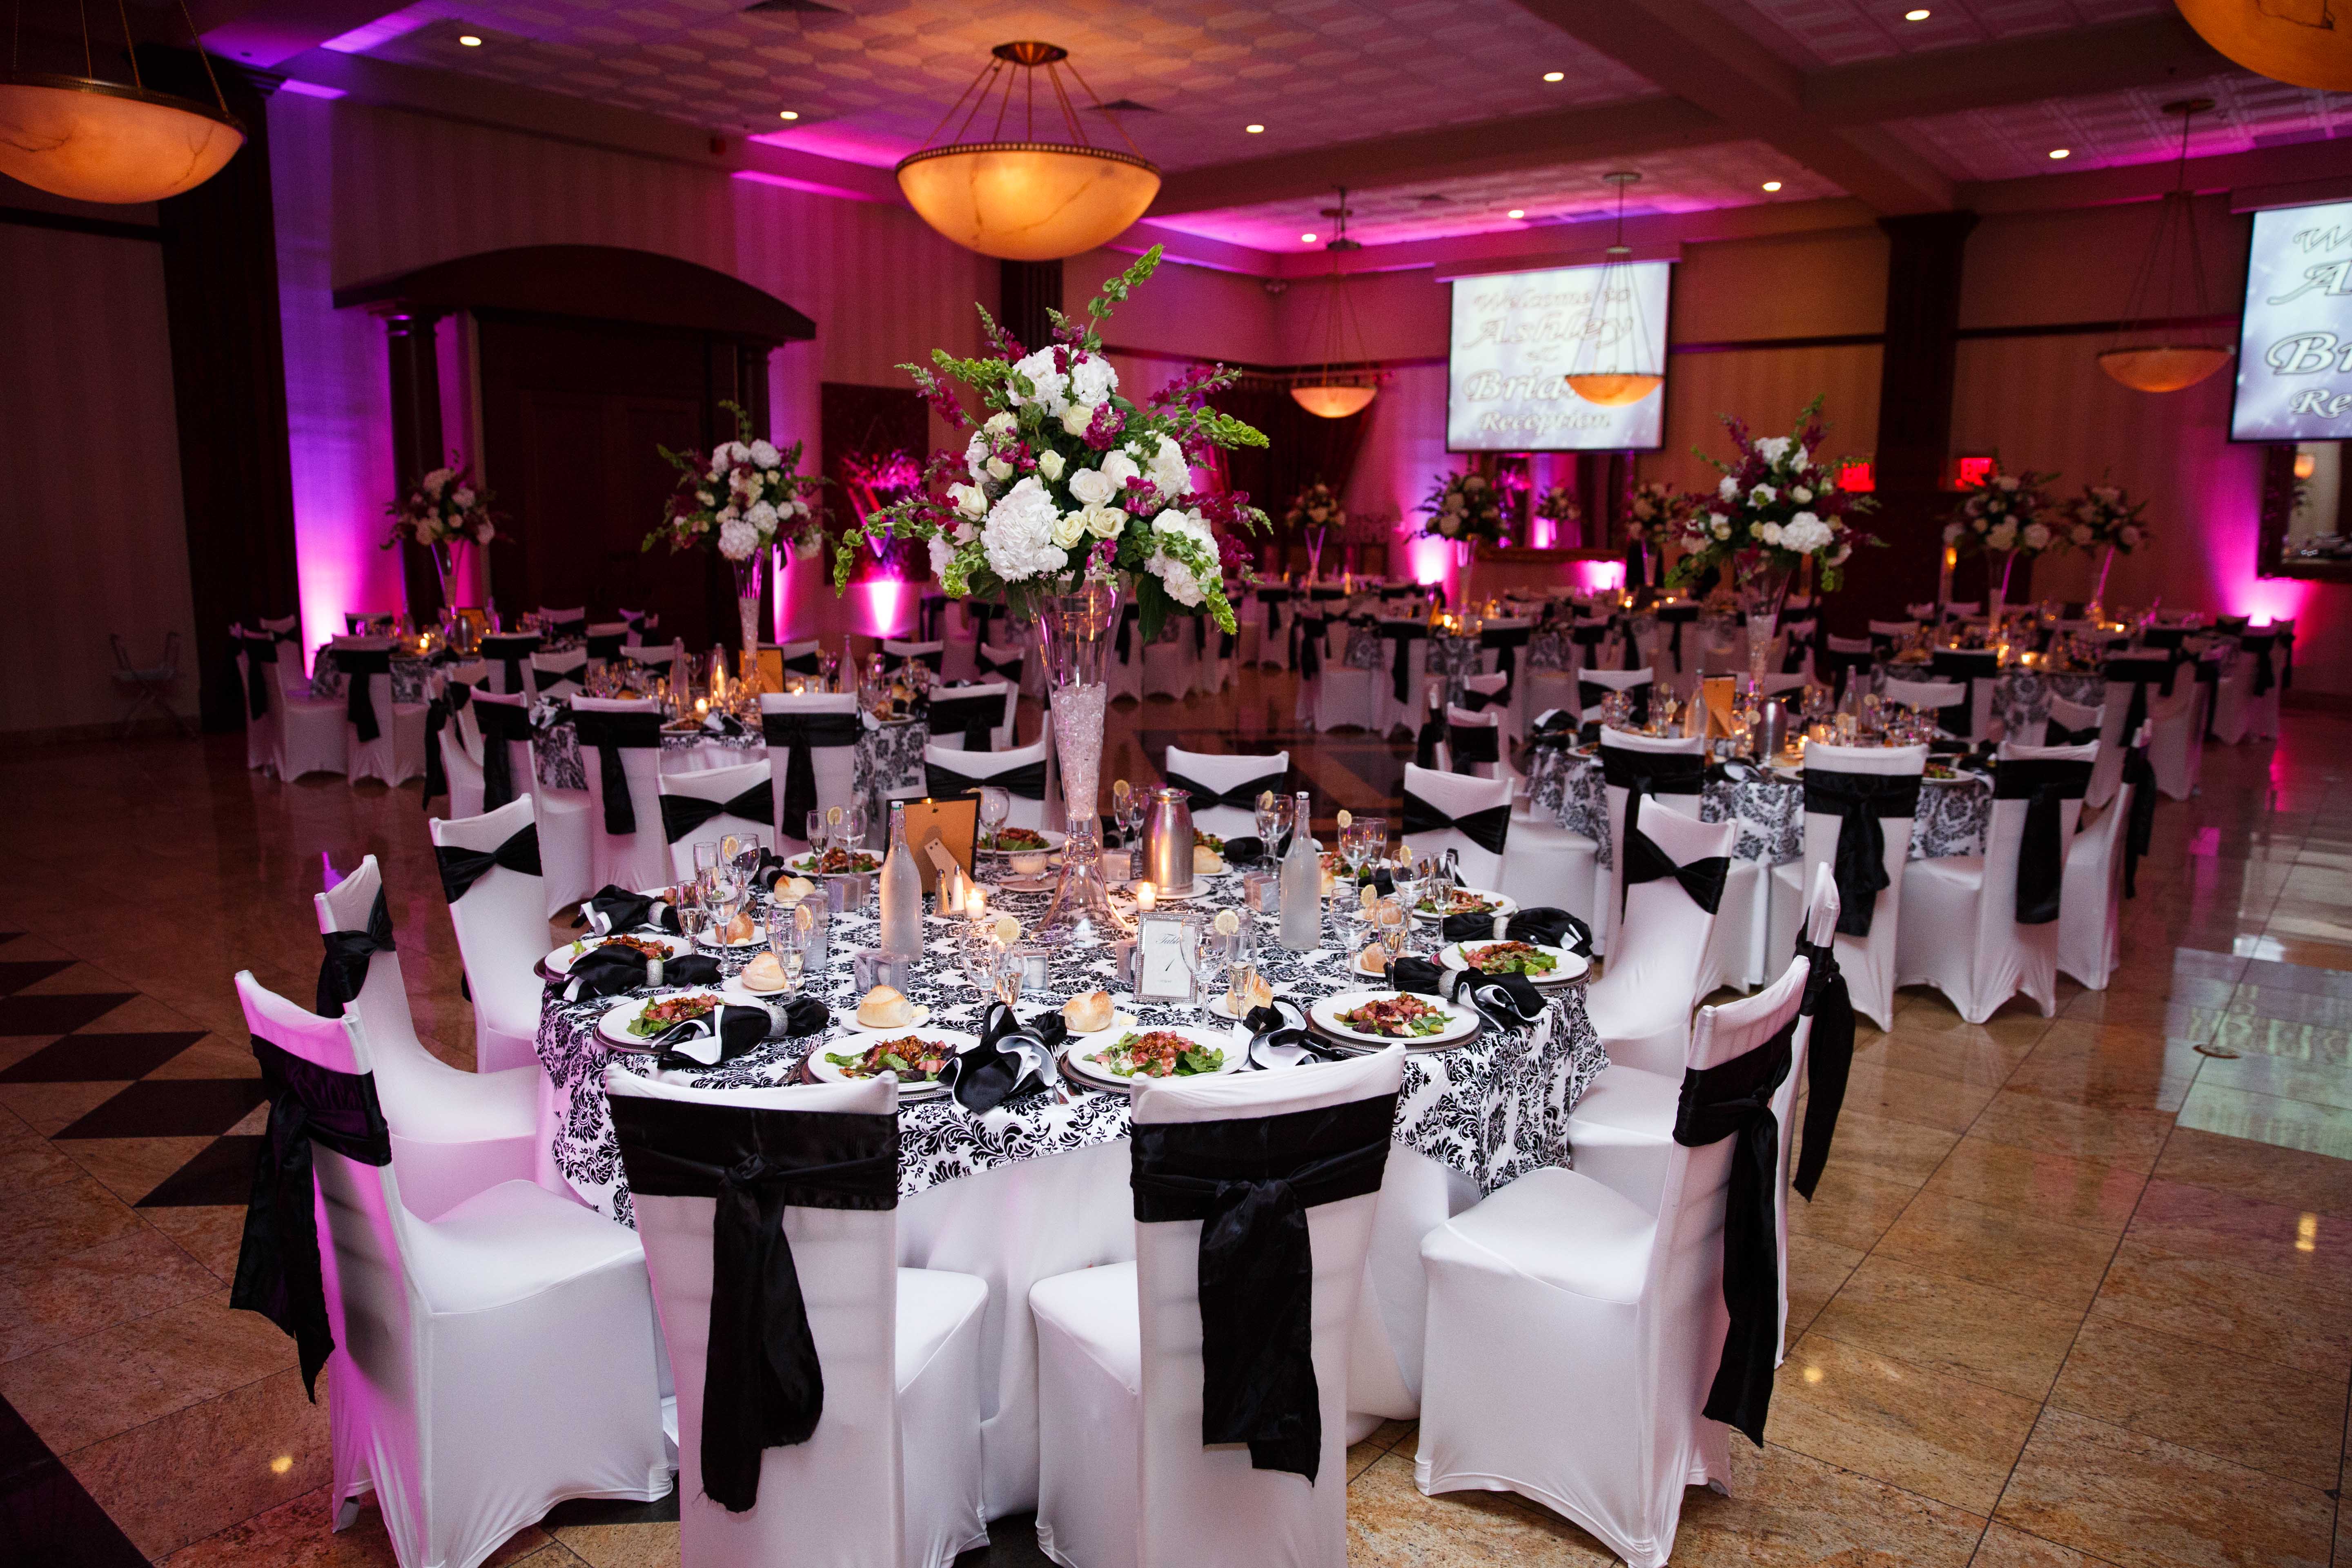 The Bridal Show at South Gate Manor